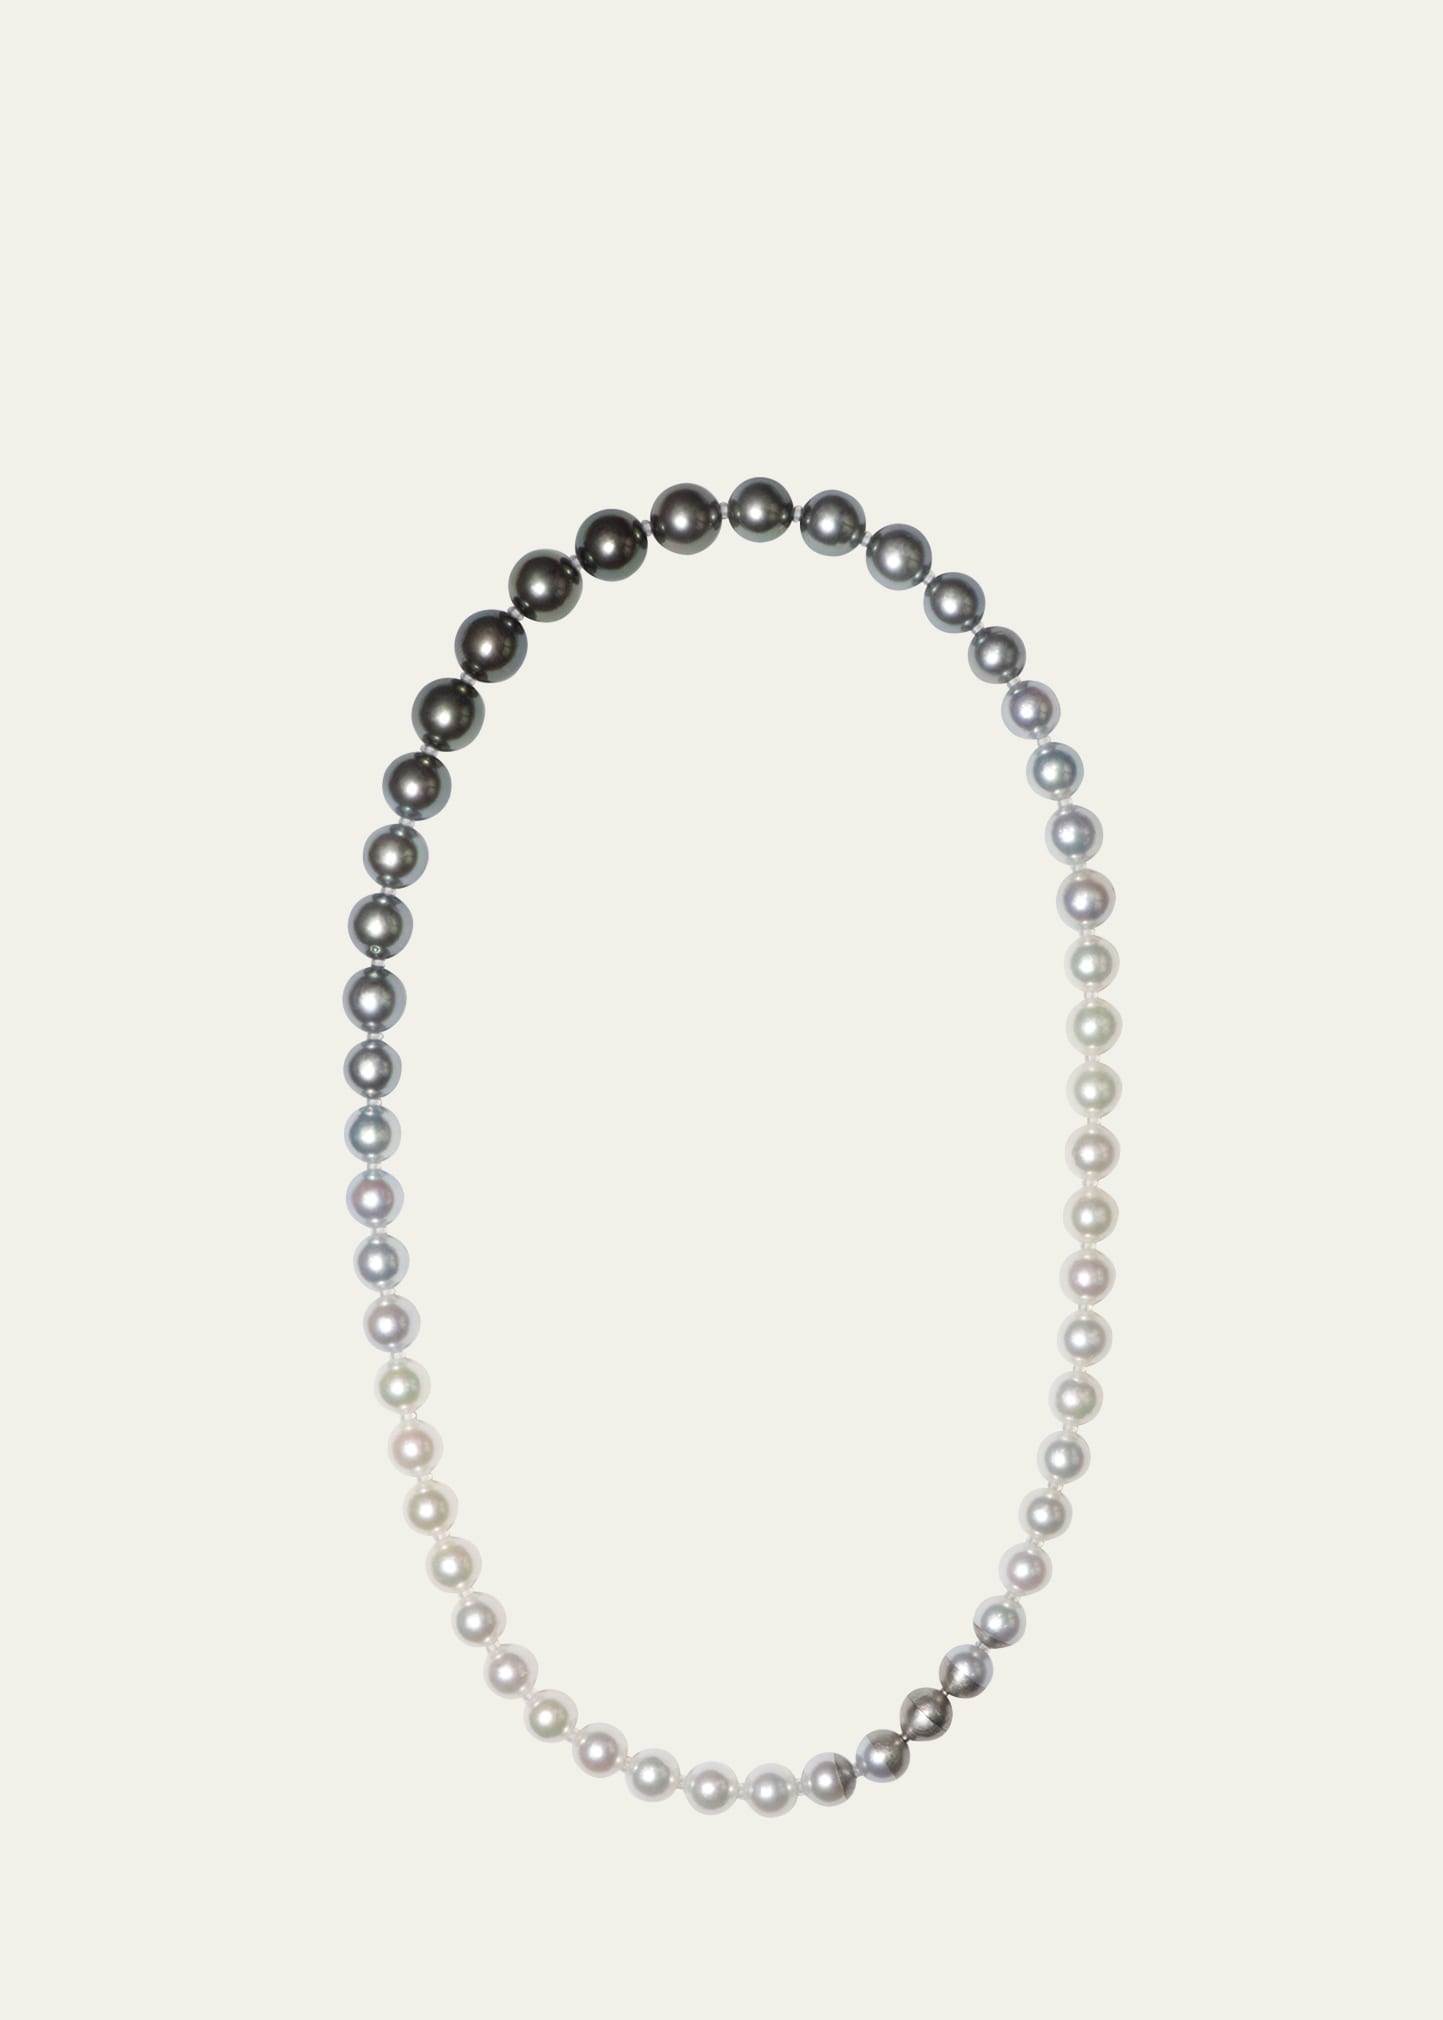 Yutai Platinum Sectional Pearl Necklace With Black Pearls And Cultured Akoya Pearls In Black Multi